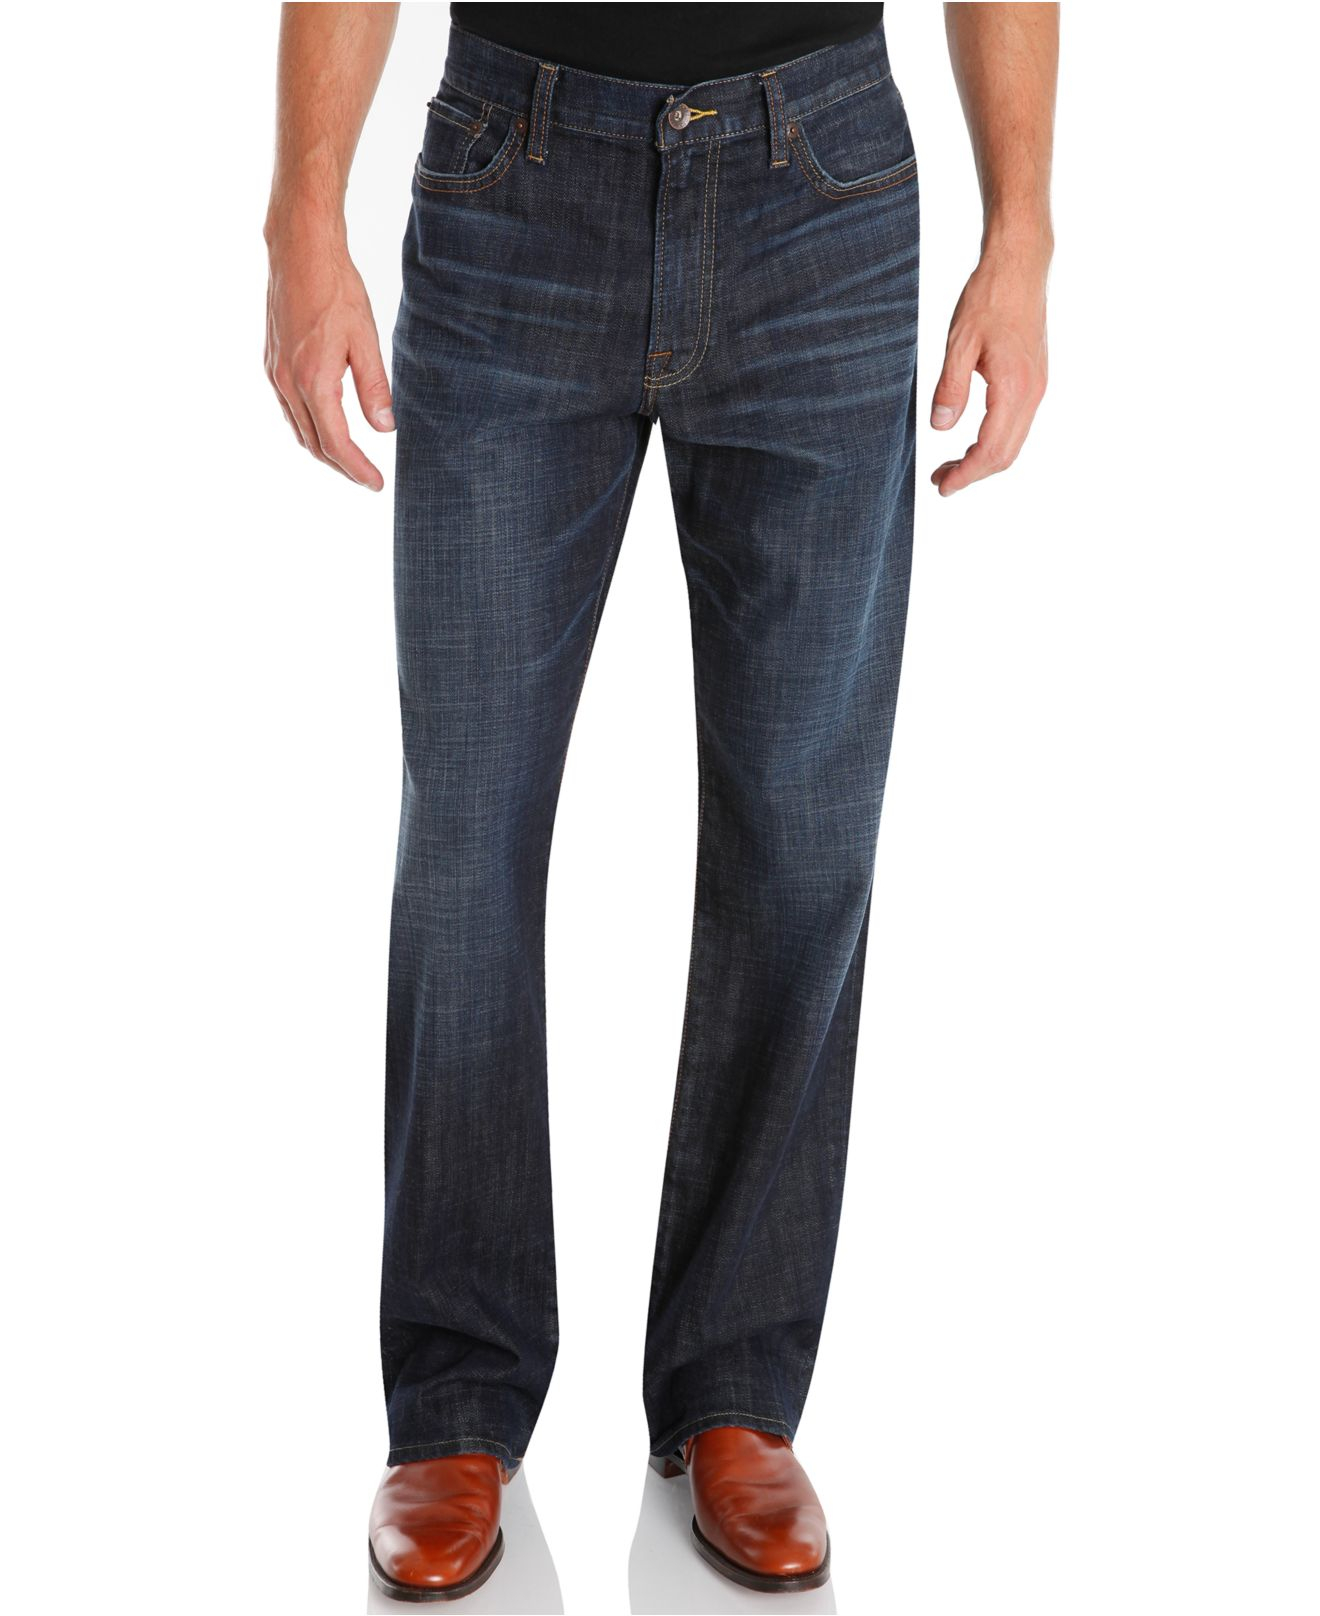 Lyst - Lucky brand Jeans Big & Tall 181 Relaxed Straight Jeans in Blue ...